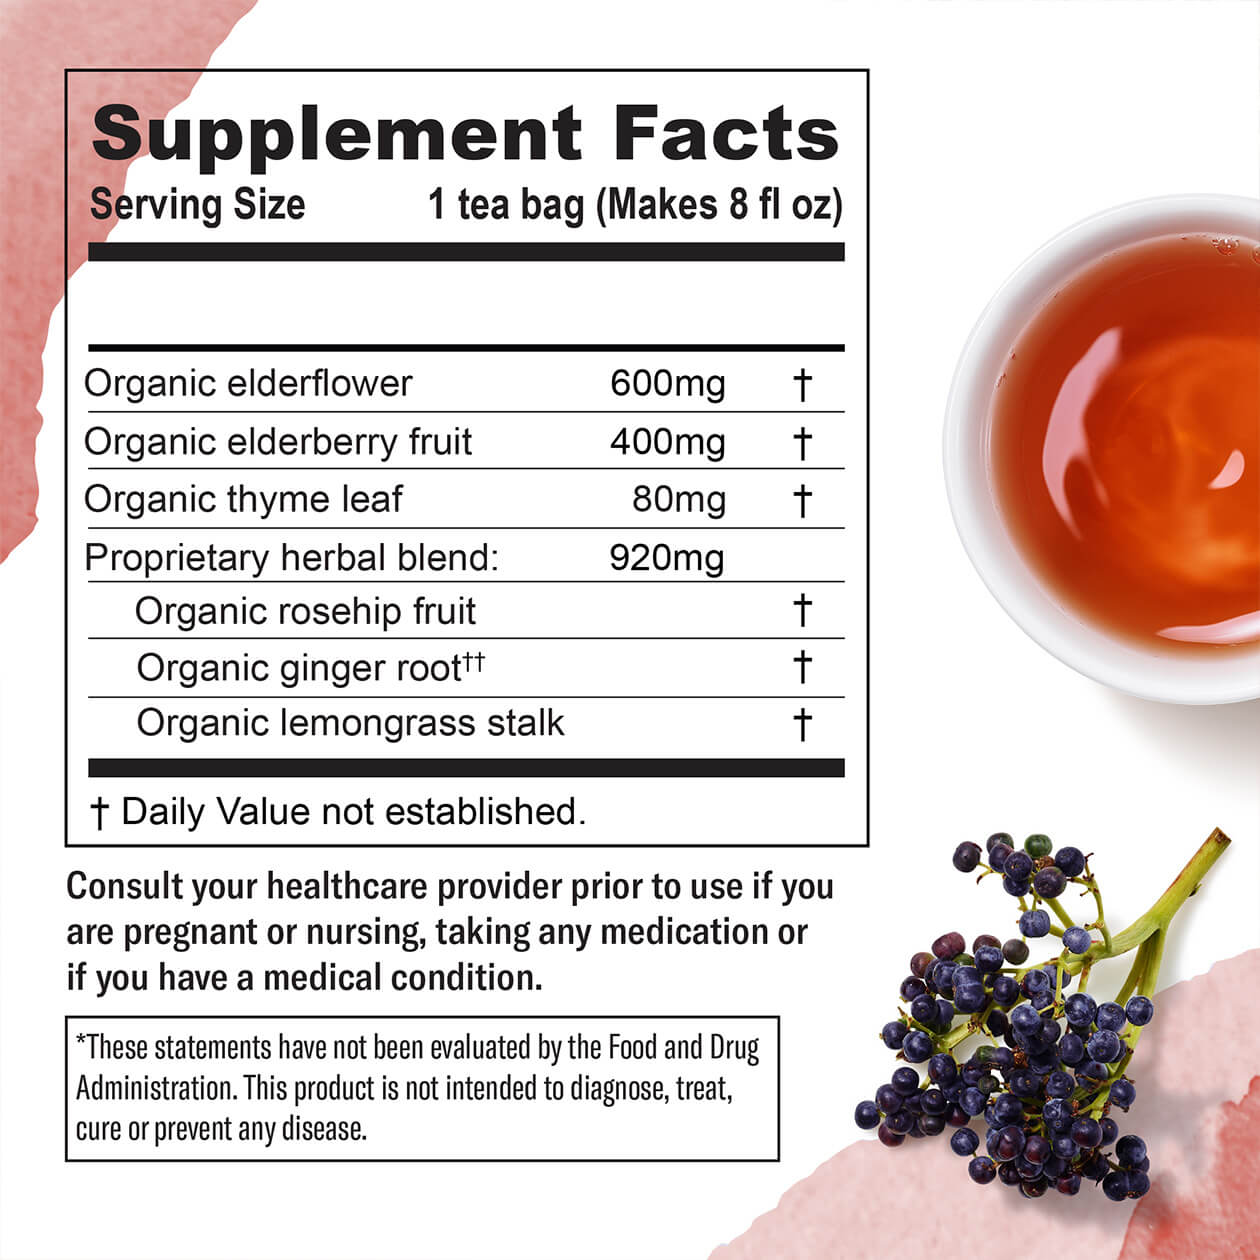 The supplement facts for Numi's Immune Support dietary supplement tea